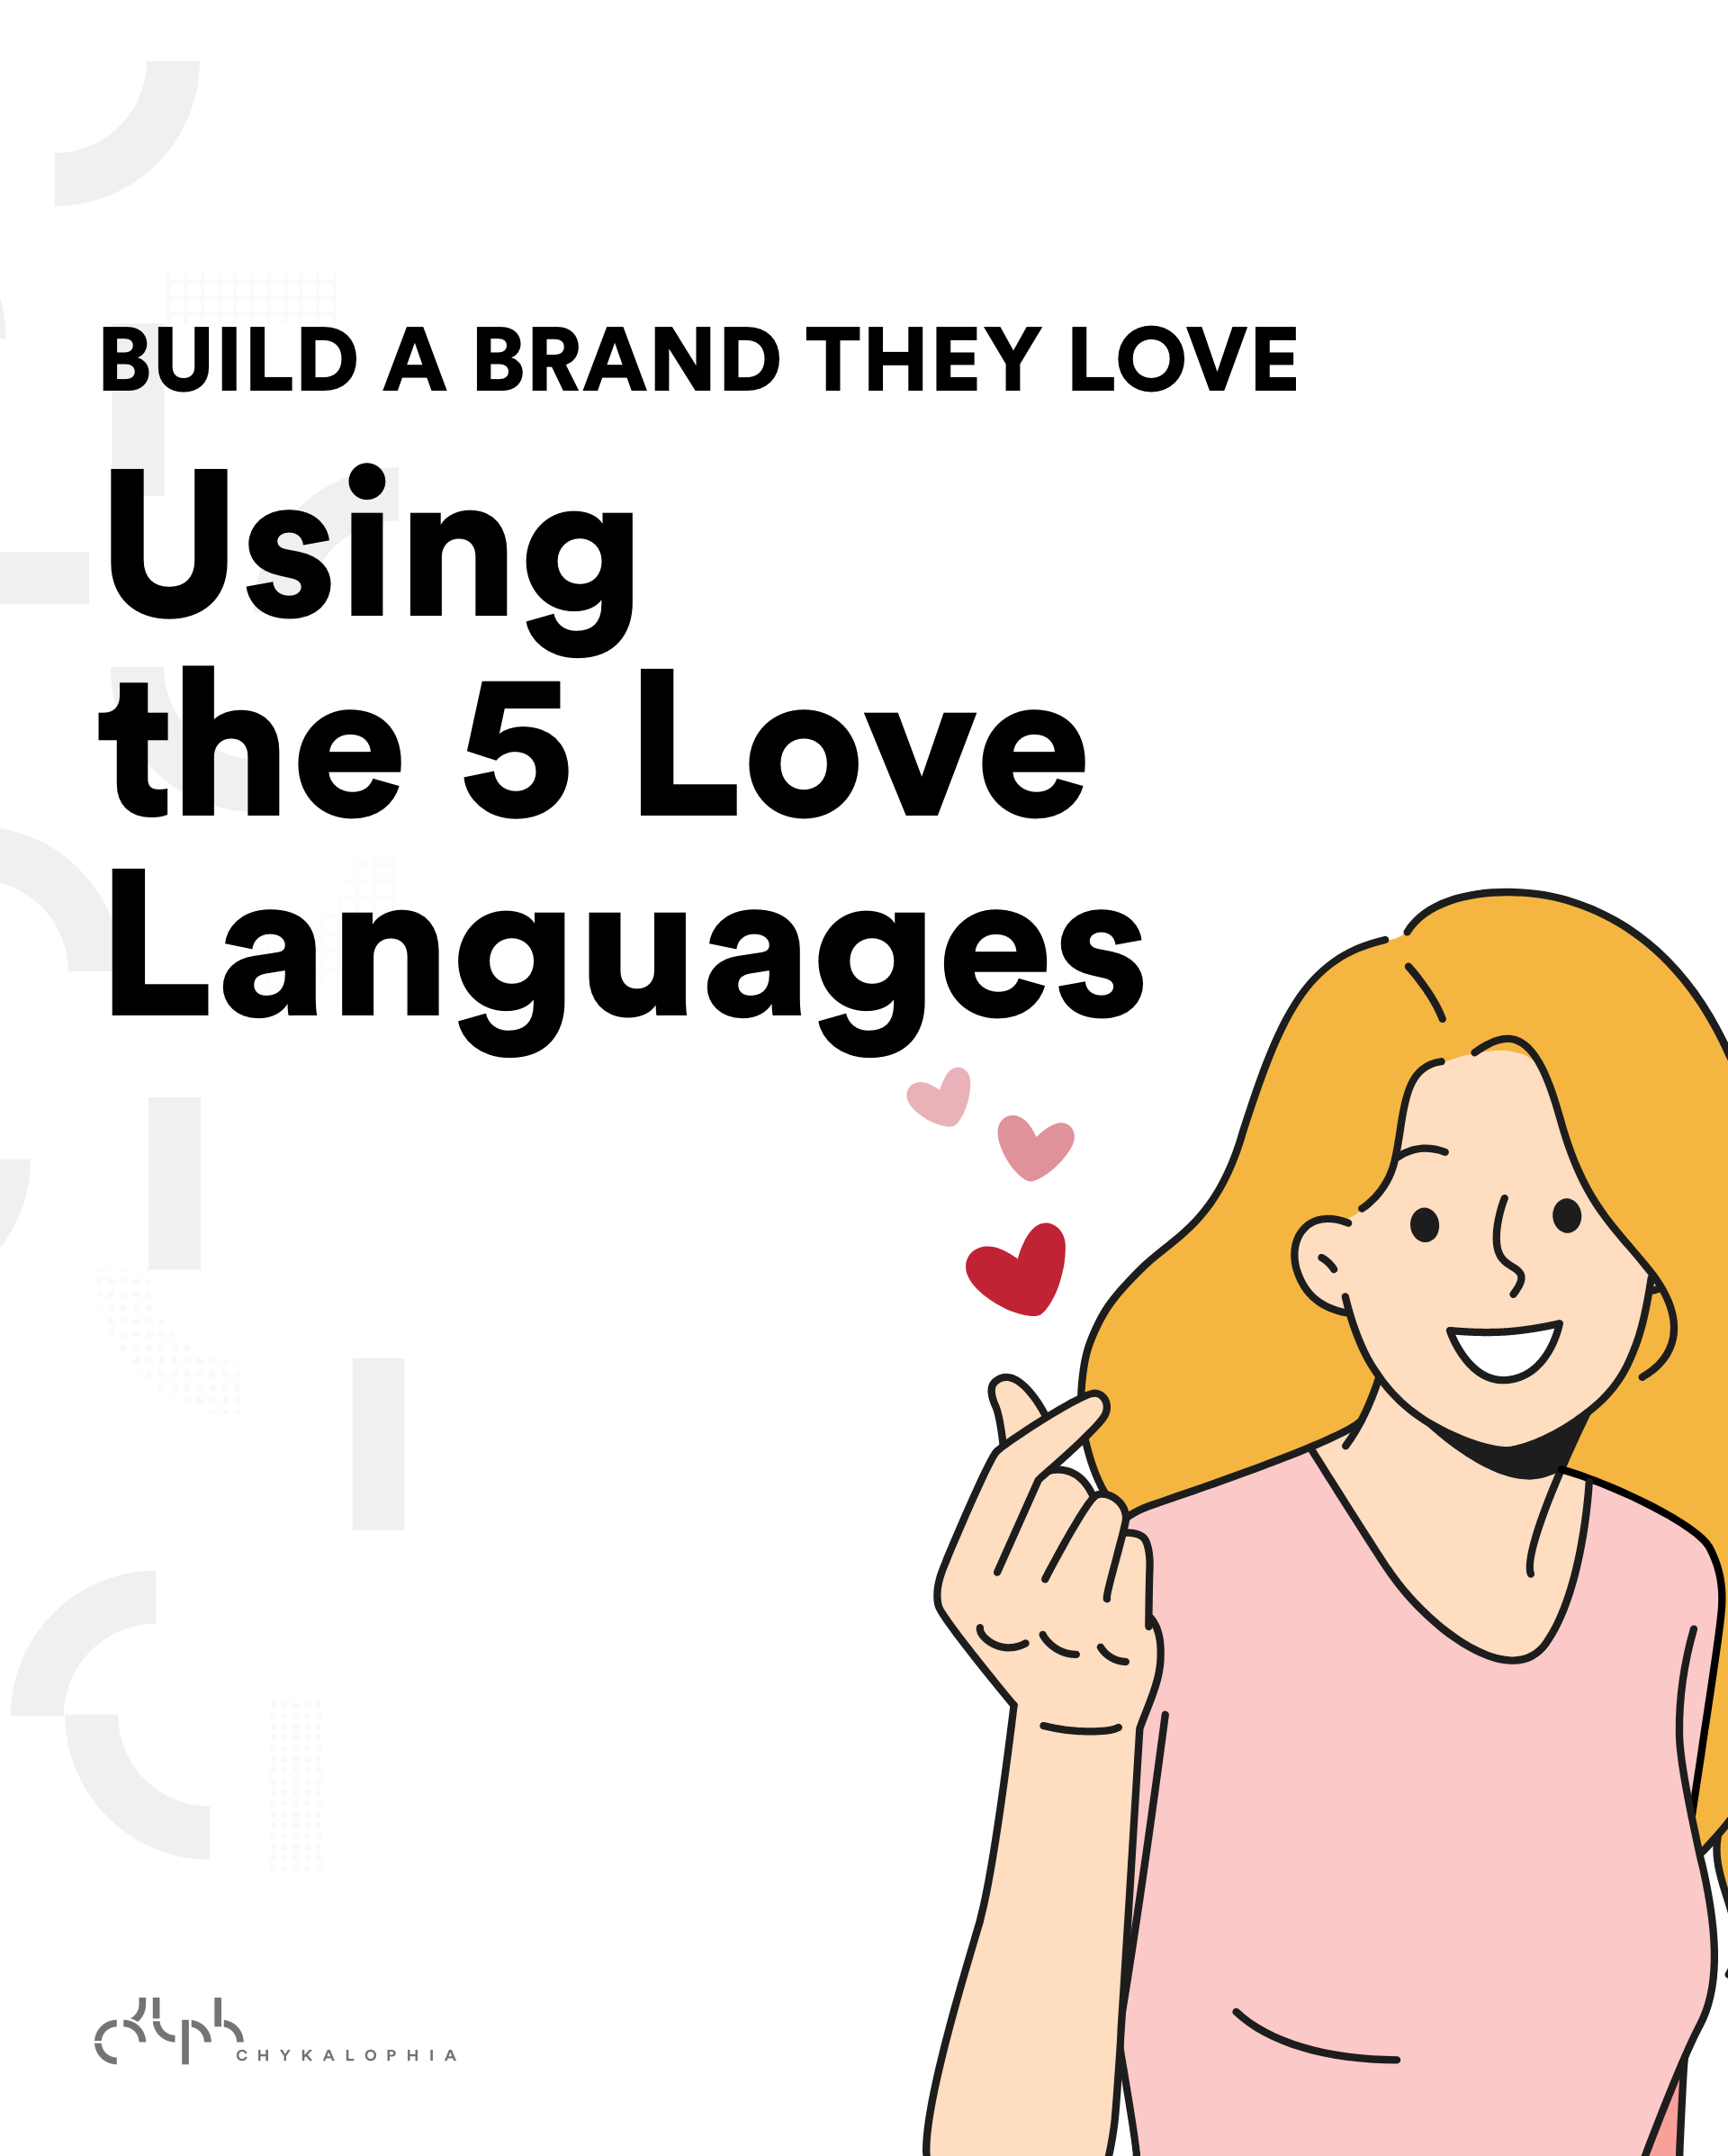 5 love languages to build a loveable brand